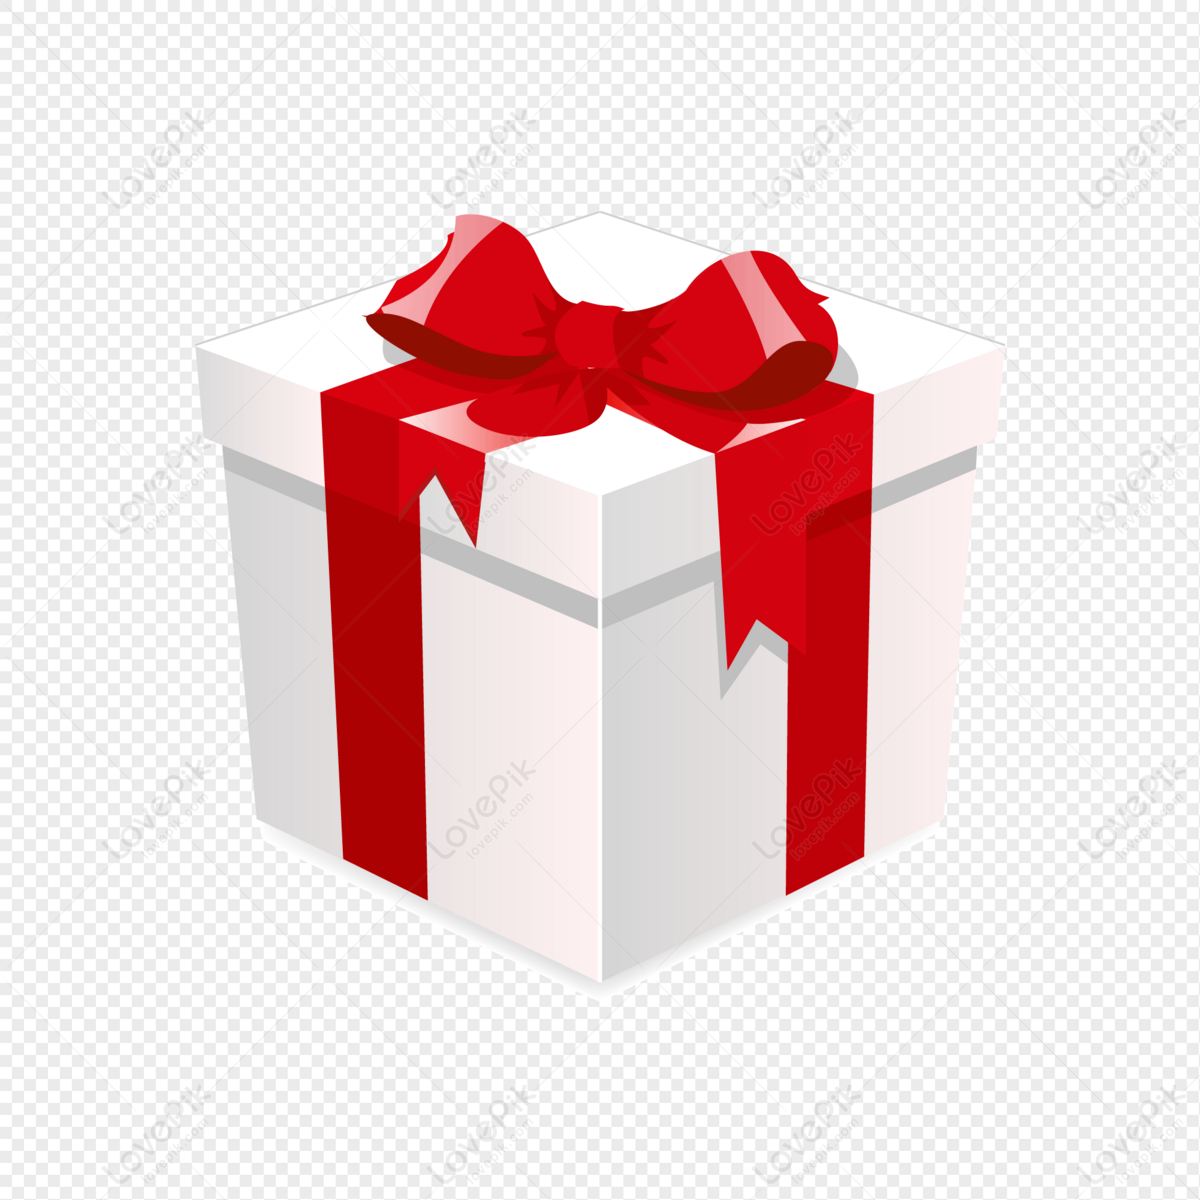 Vector Gift Red Box PNG Transparent Background, Free Download #39664 -  FreeIconsPNG